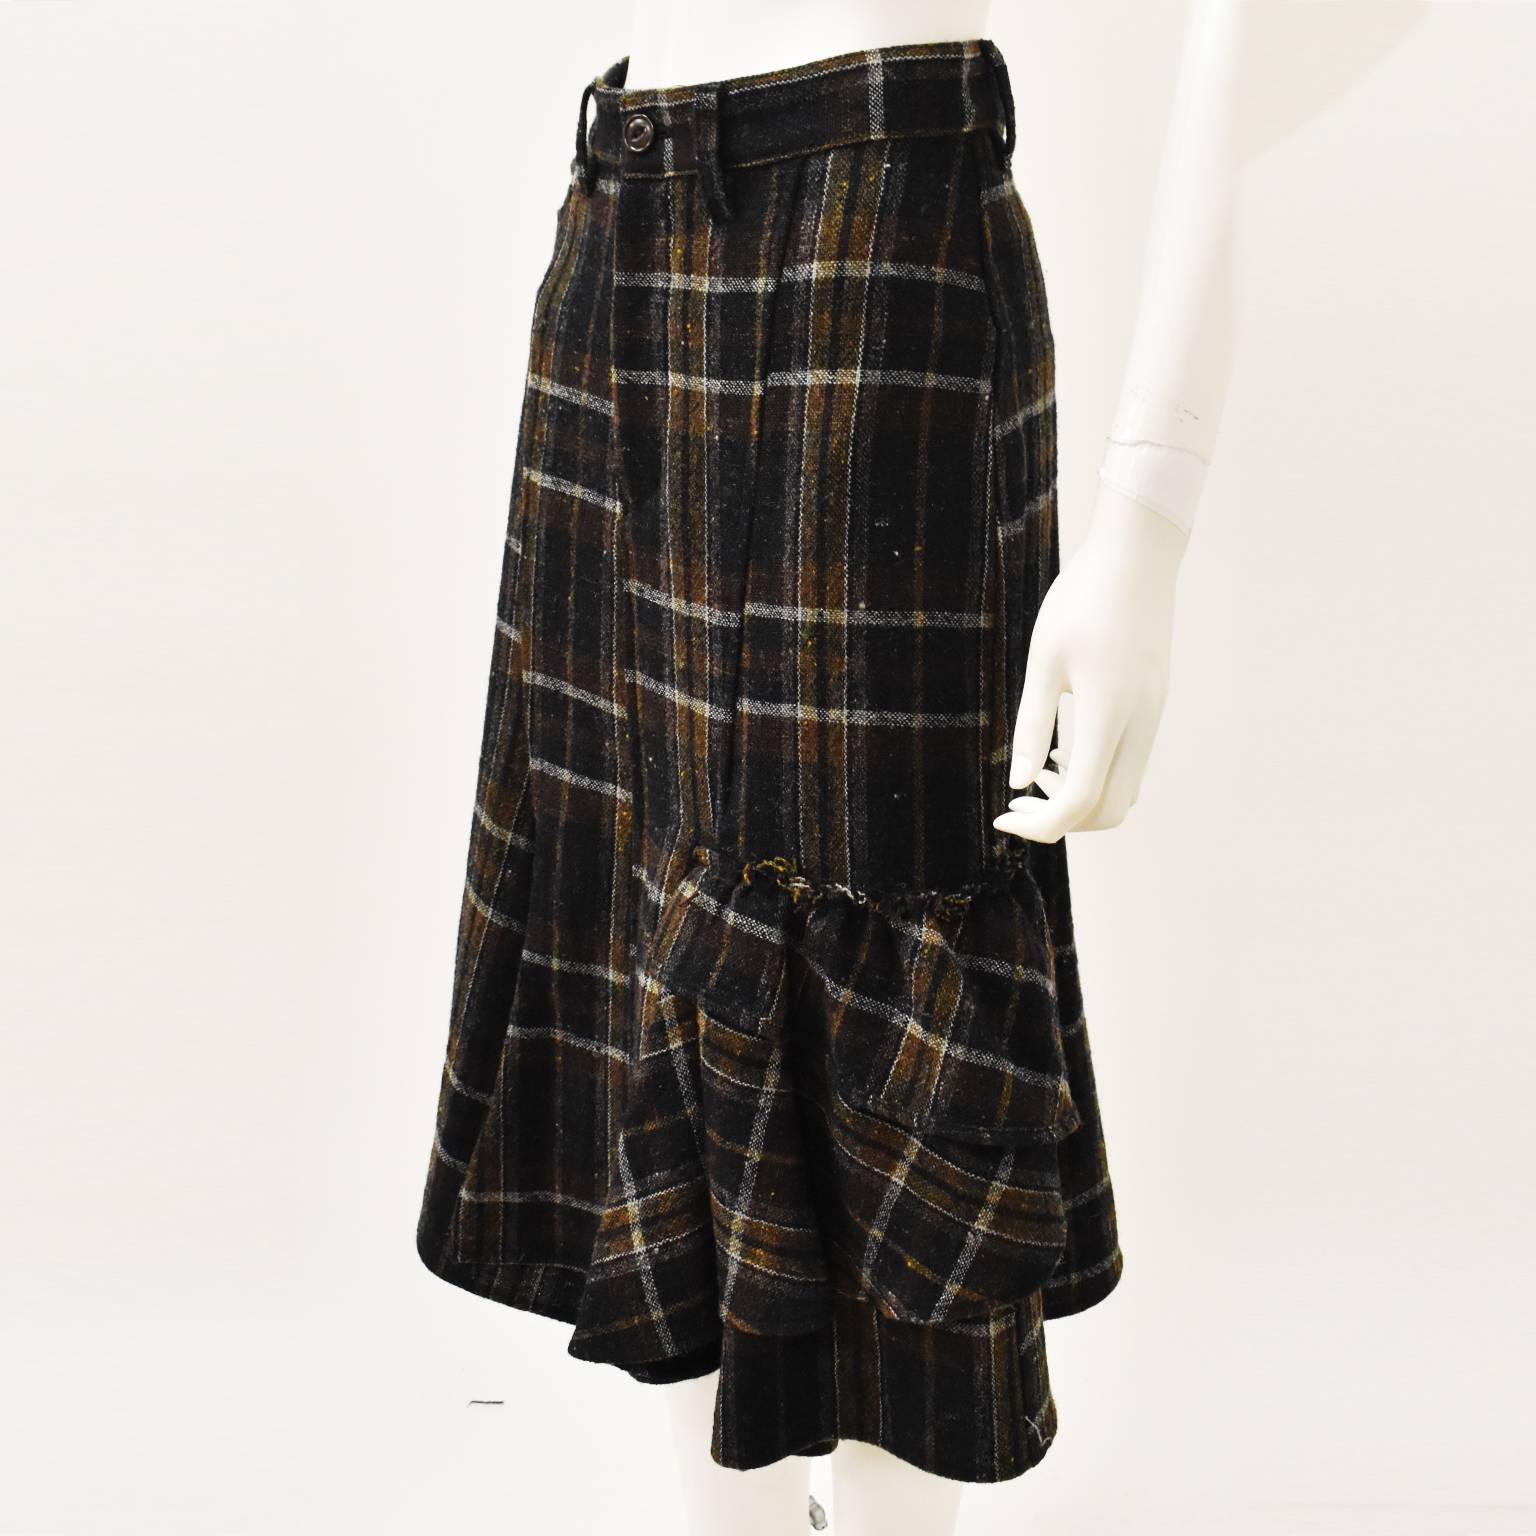 A Japanese twist on a classic check skirt from Yohji Yamamoto’s Y’s label. The skirt has a simple,  A-line shape but has a deconstructed ruffles on one side. The skirt sits on the waist and has a central button and zip fastening. It is made from a